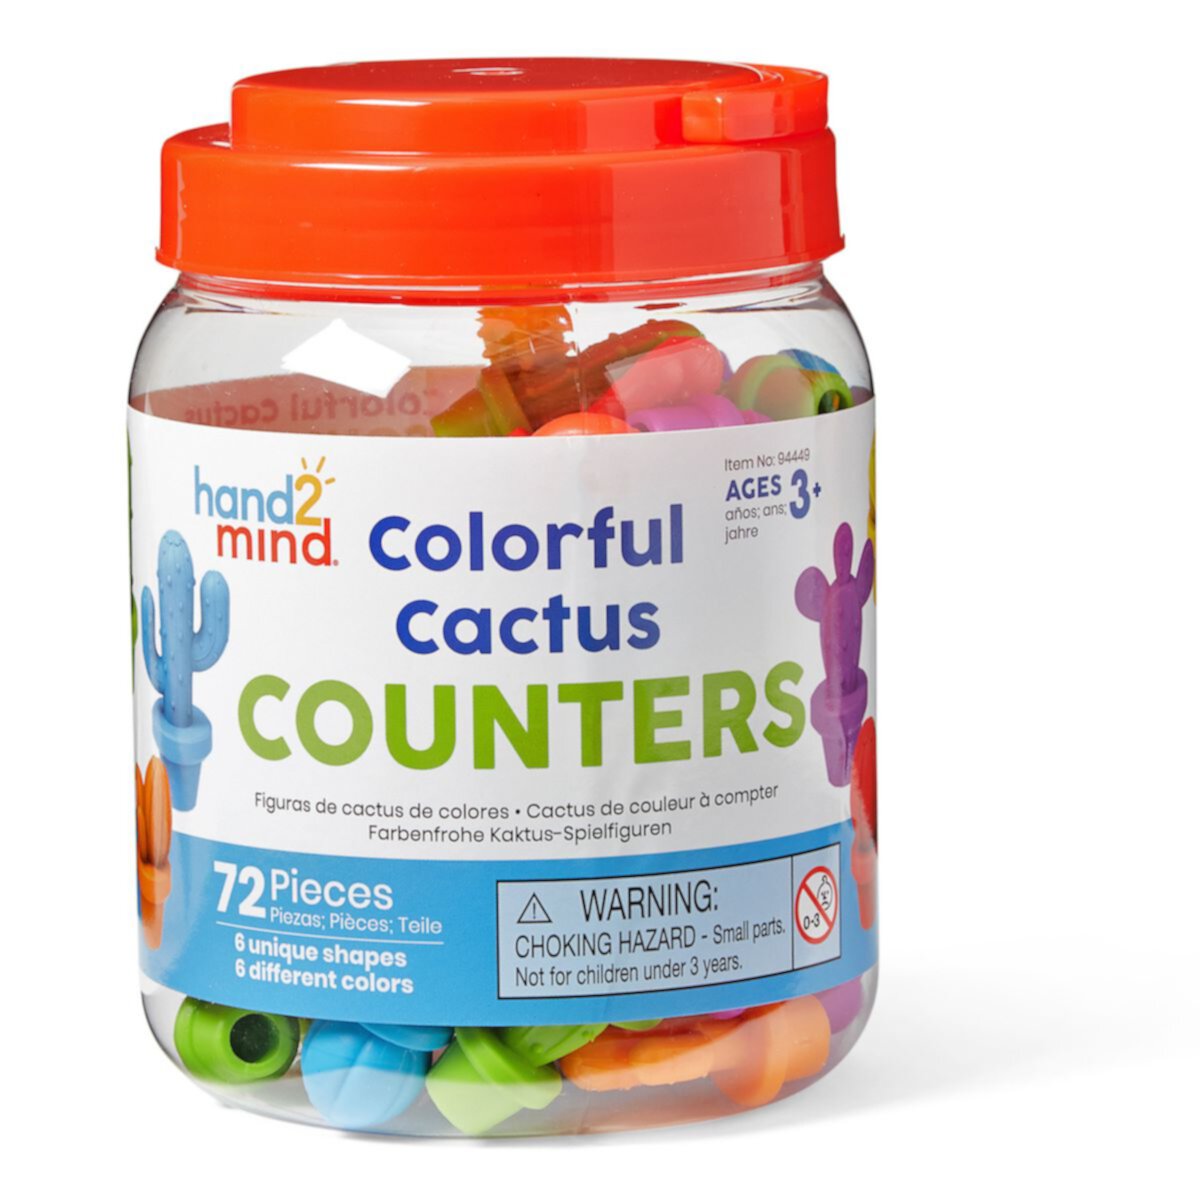 hand2mind Colorful Cactus Counters Hand2mind